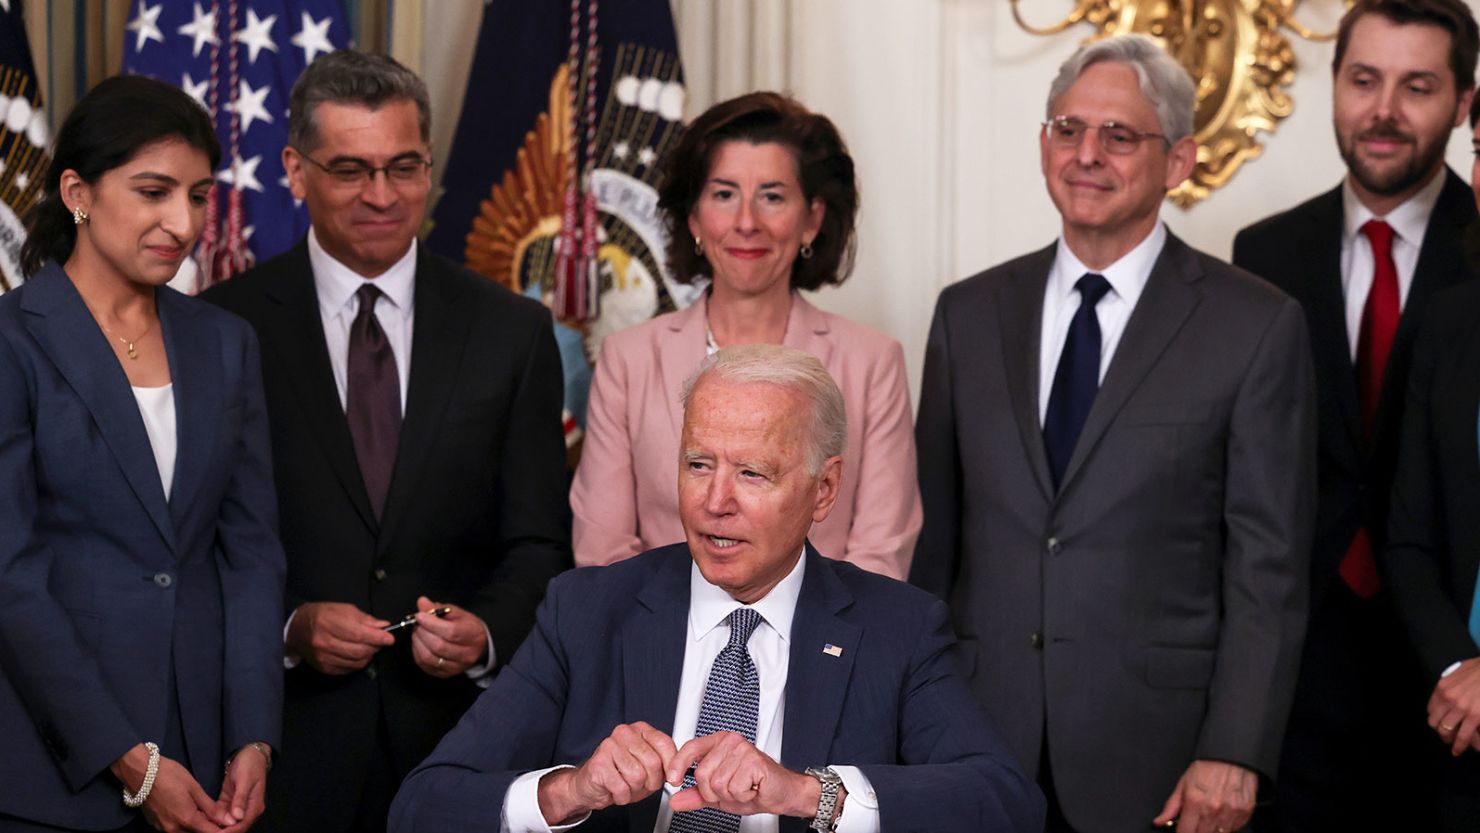 U.S. President Joe Biden signs an executive order on "promoting competition in the American economy" as members of his Cabinet standby in the State Dining Room at the White House in Washington U.S., July 9, 2021.